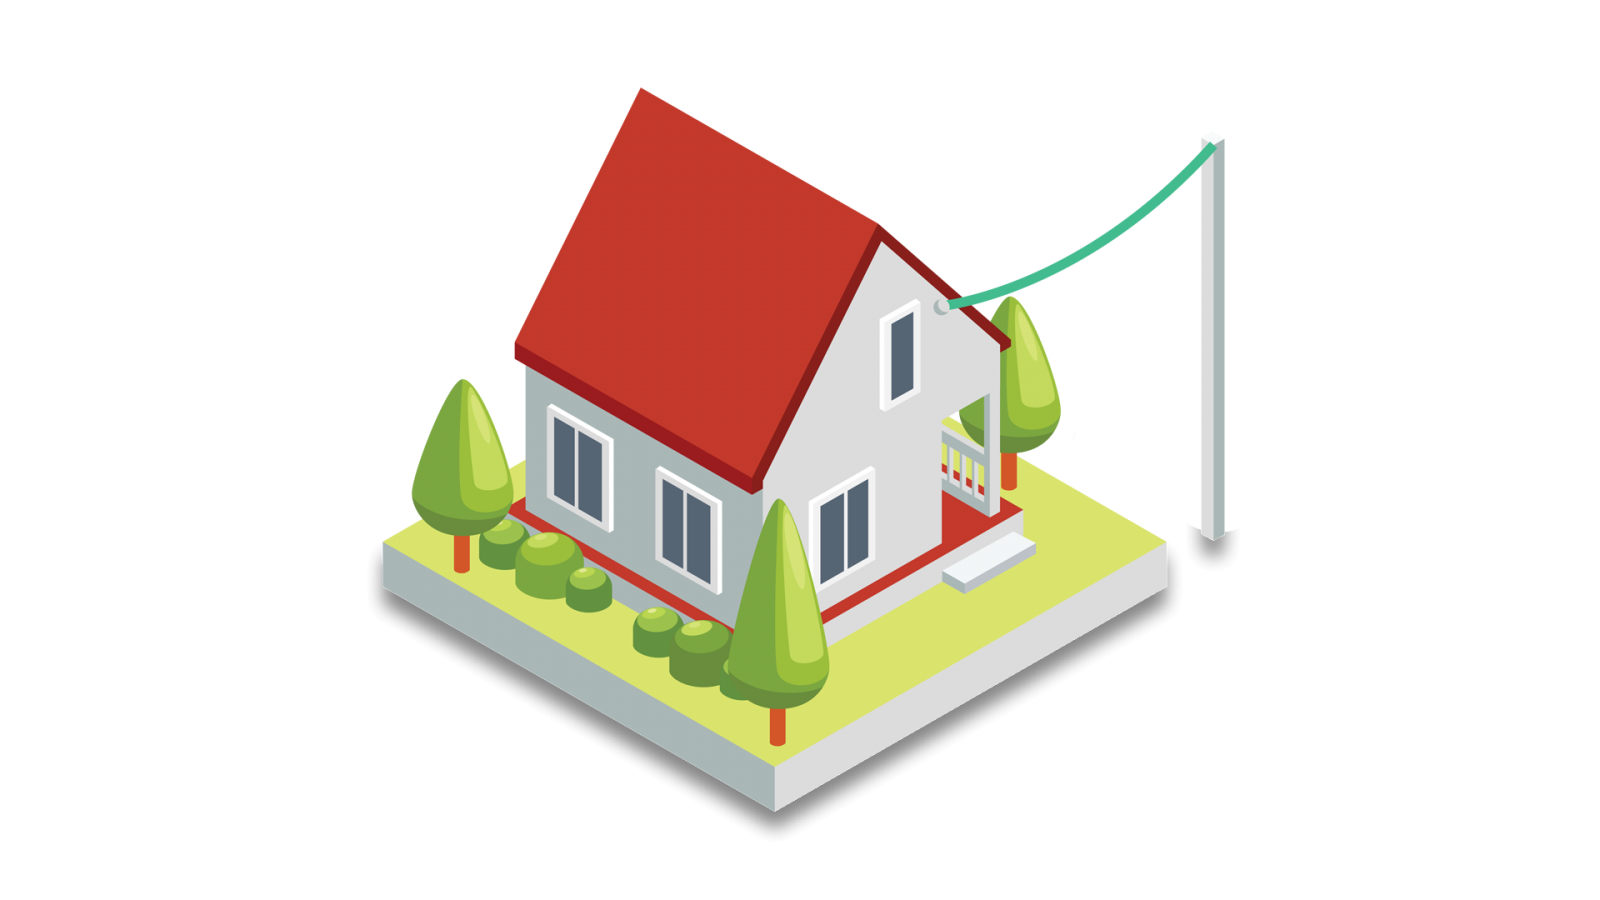 isometric illustration of a house with a power line coming from a pole